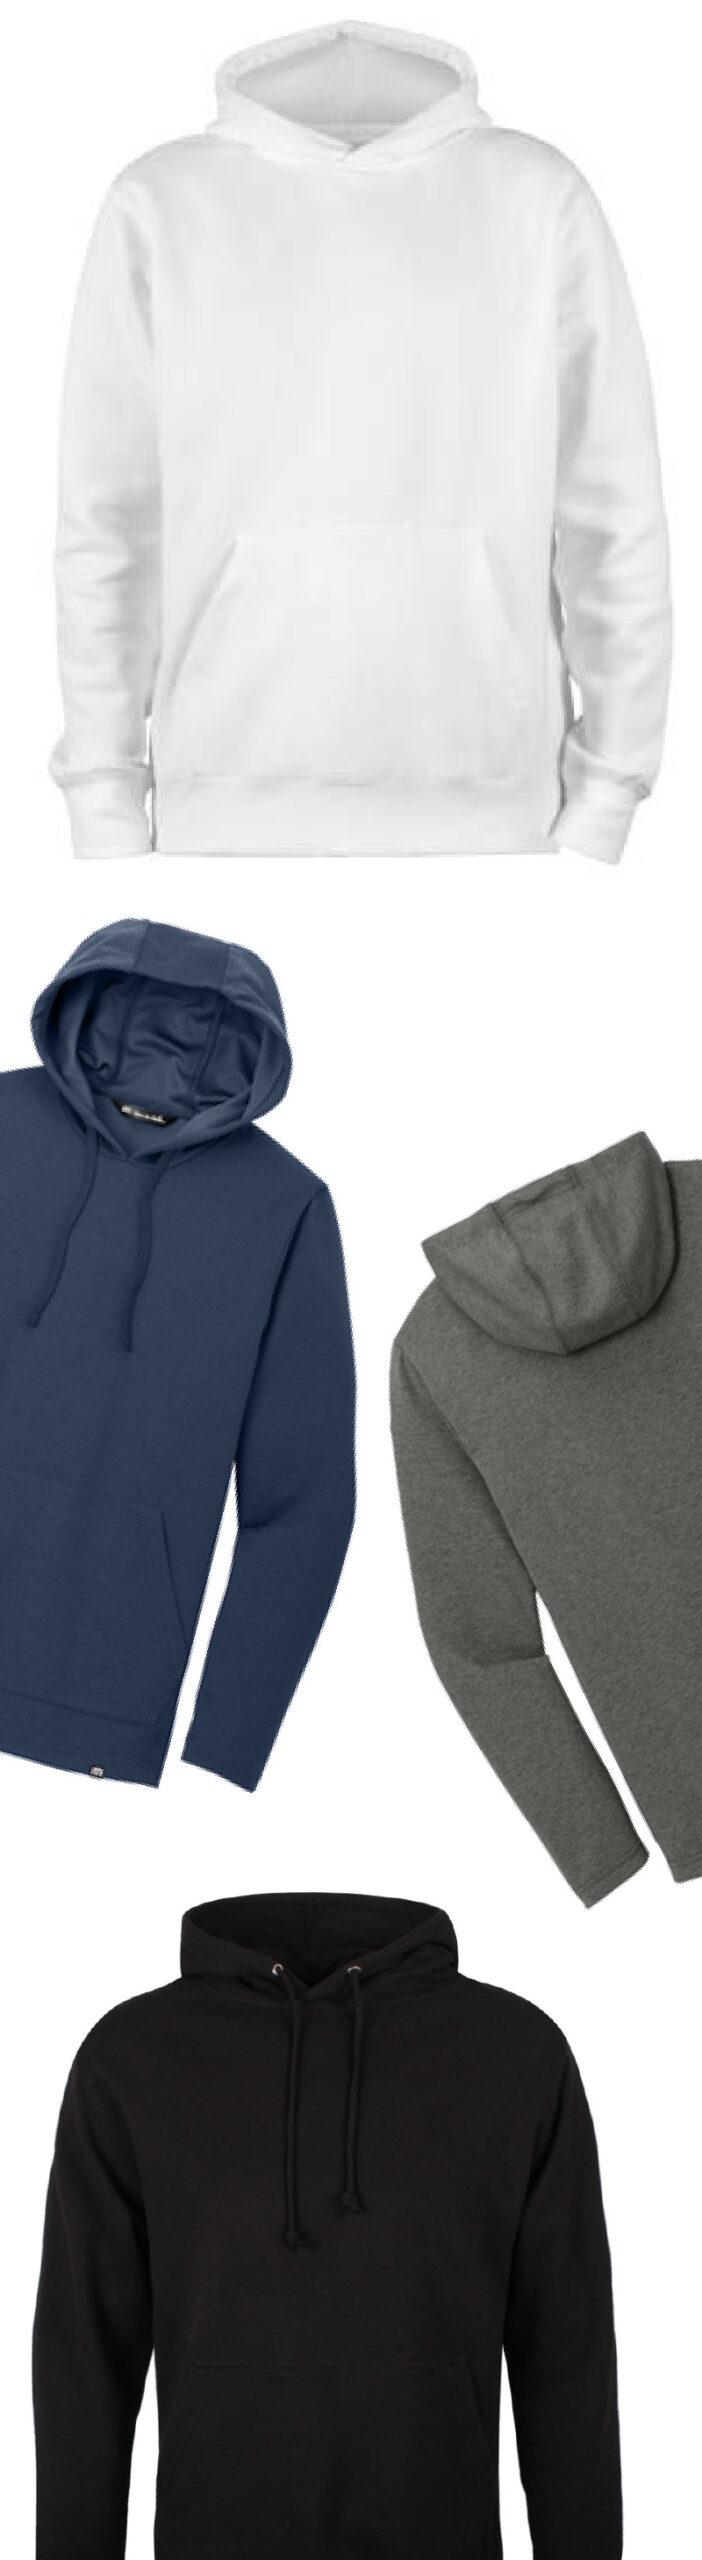 Multiple Hoodies: Stay Cozy and Stylish